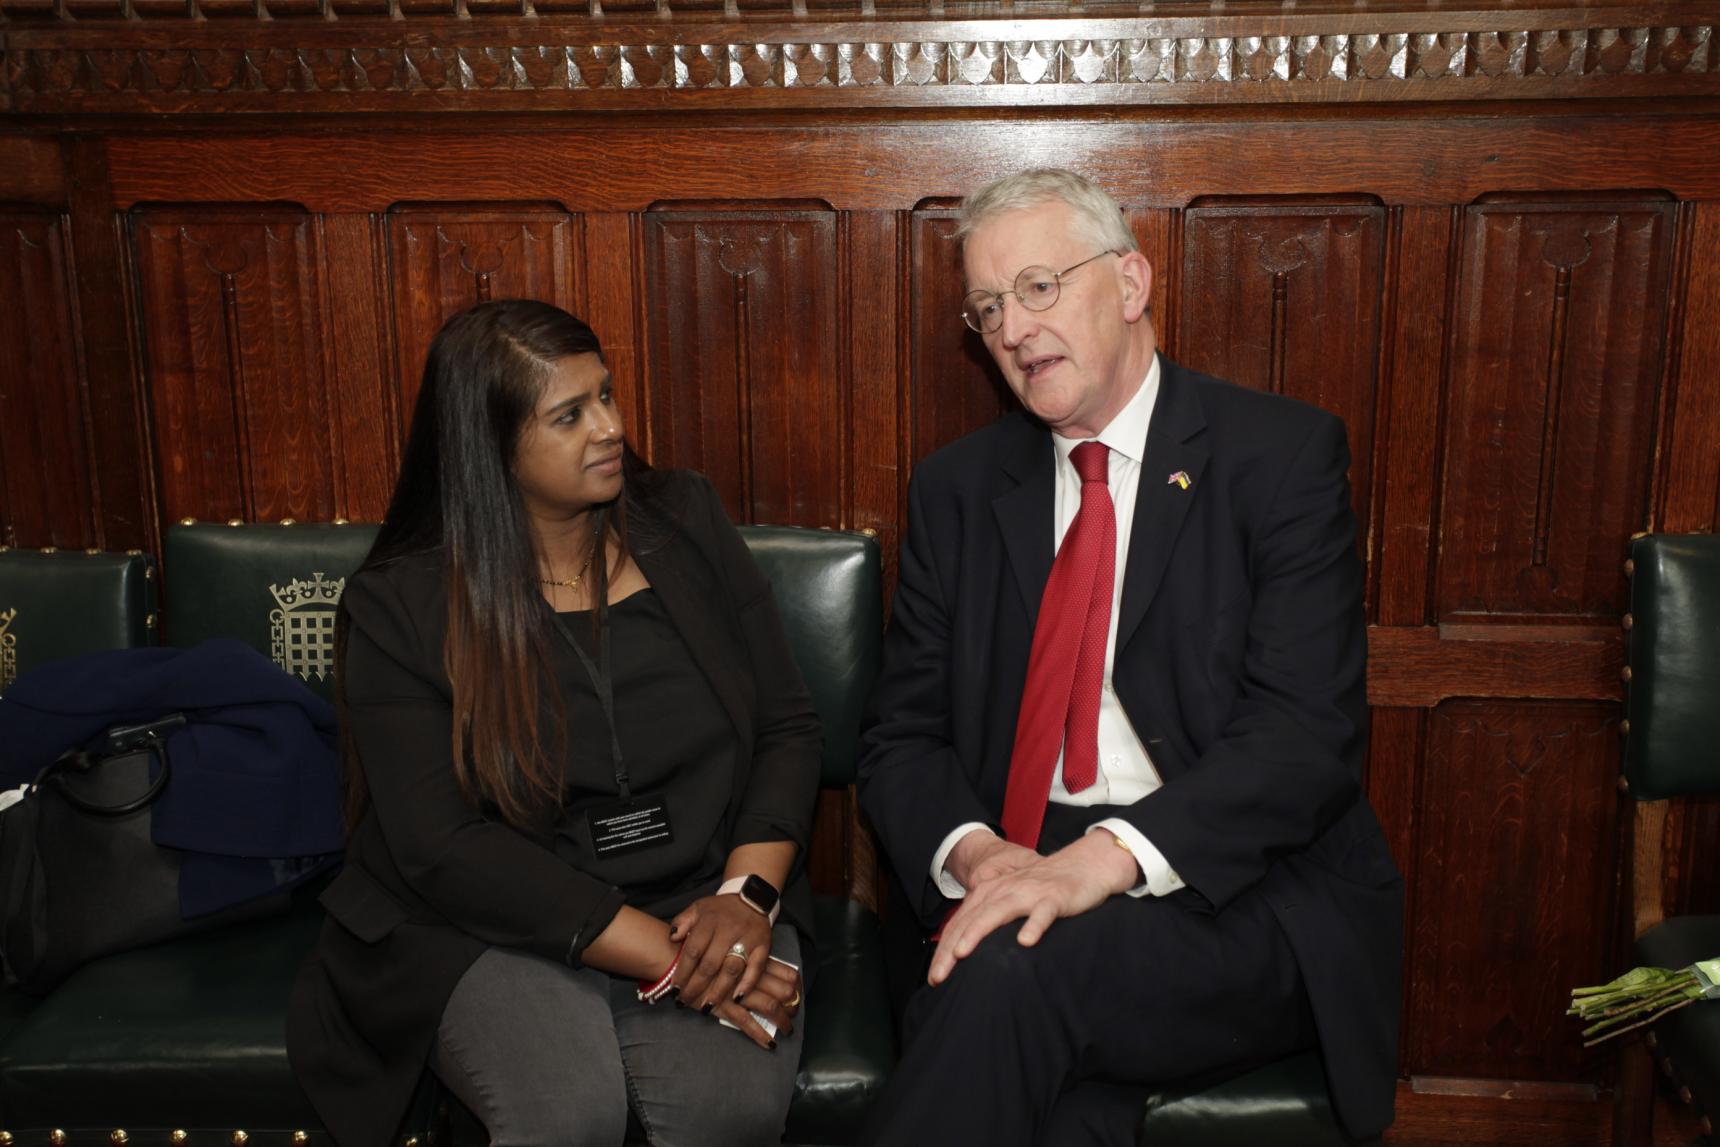 Alzheimer's Society campaigner Versha speaks with Hilary Benn MP at a parliamentary event for Dementia Action Week